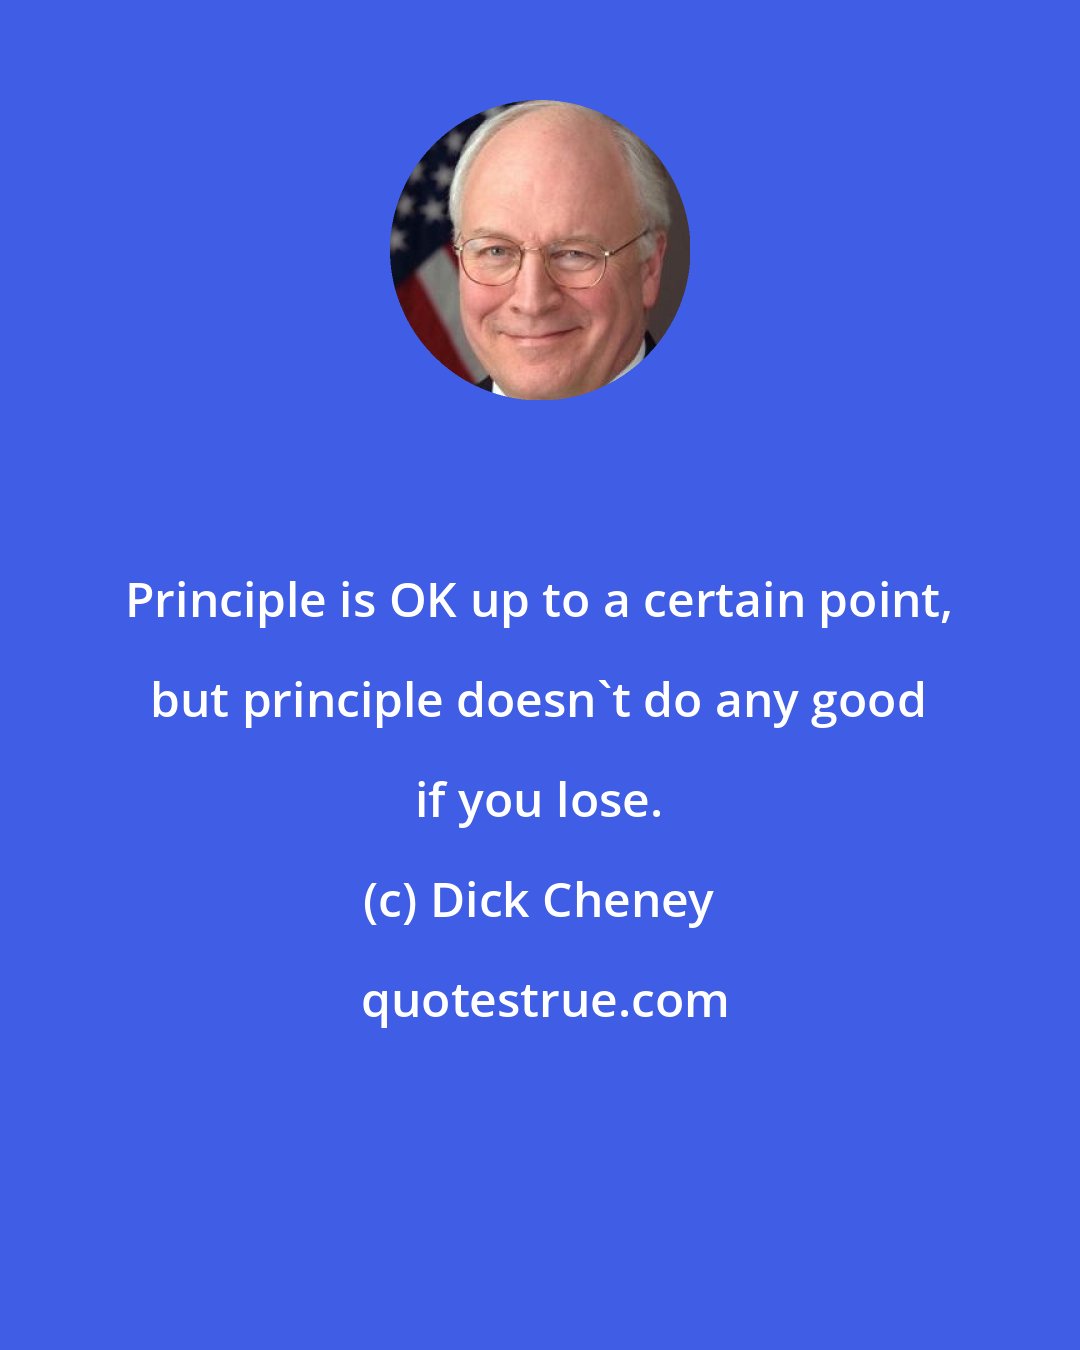 Dick Cheney: Principle is OK up to a certain point, but principle doesn't do any good if you lose.